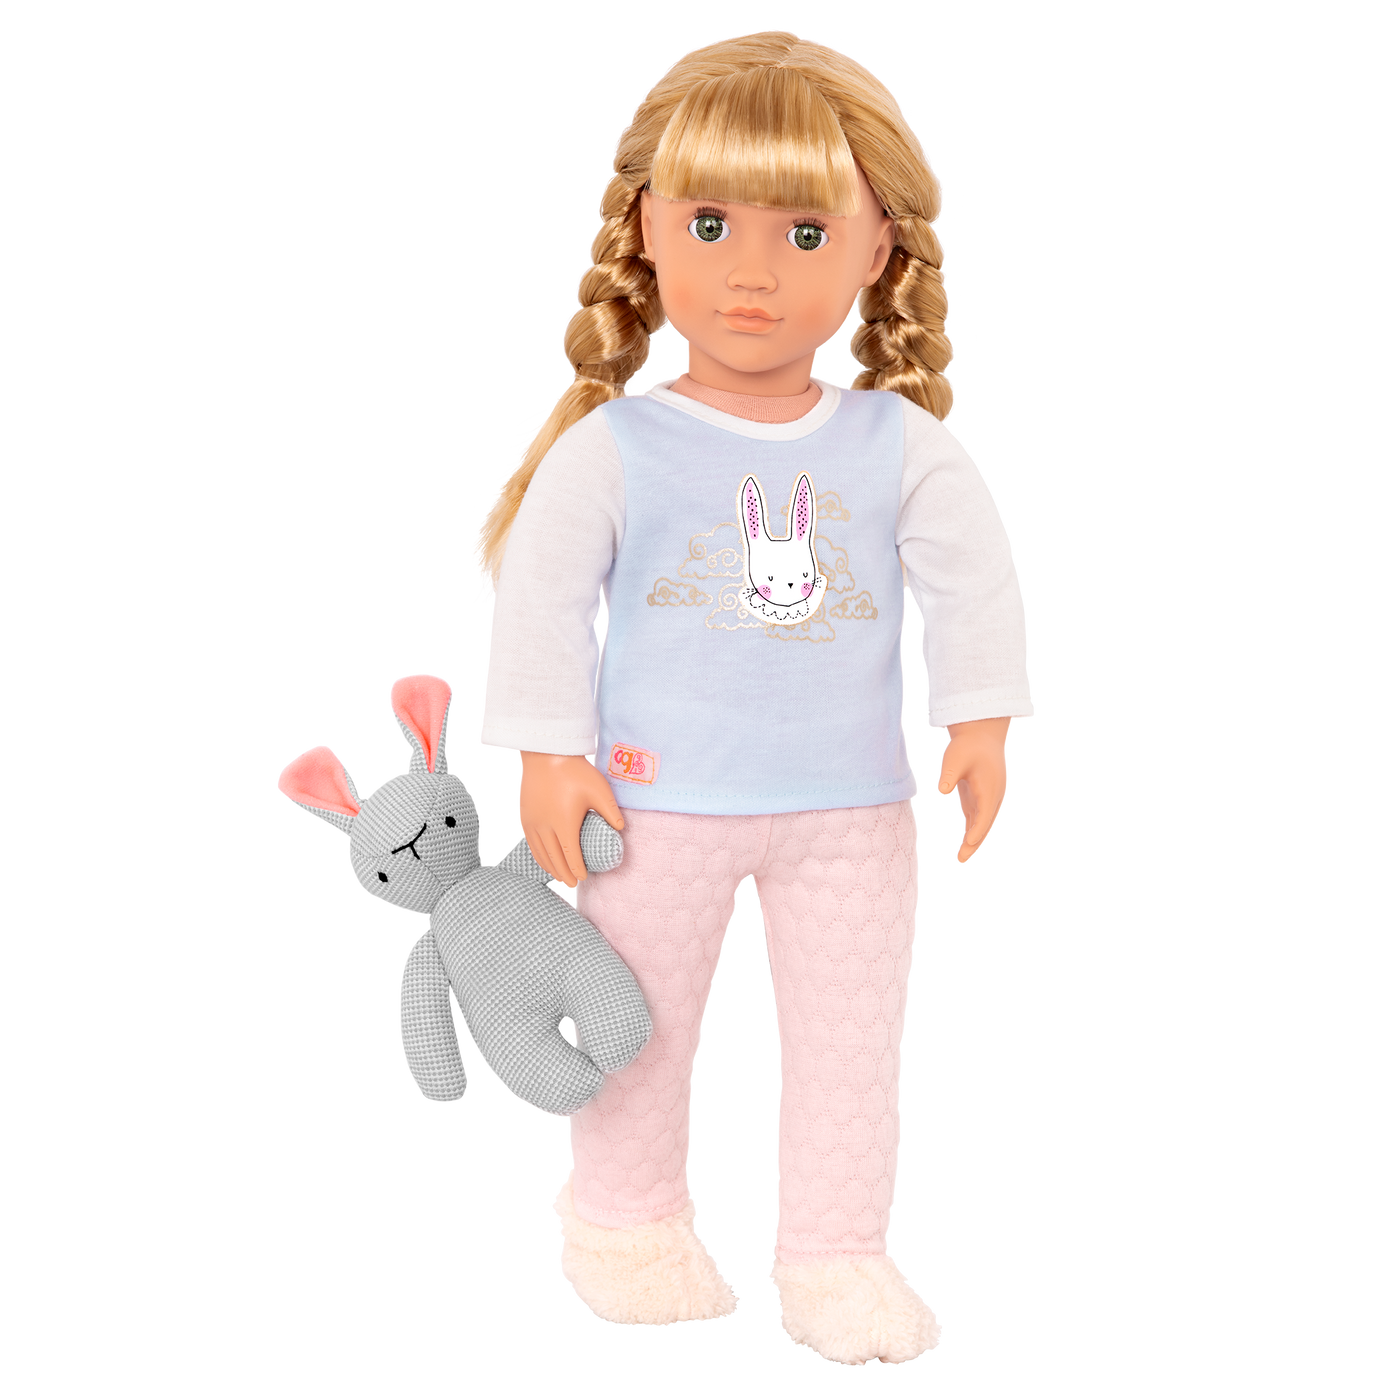 Willow, Sleepover 18-inch Doll Brown Hair Blue Eyes